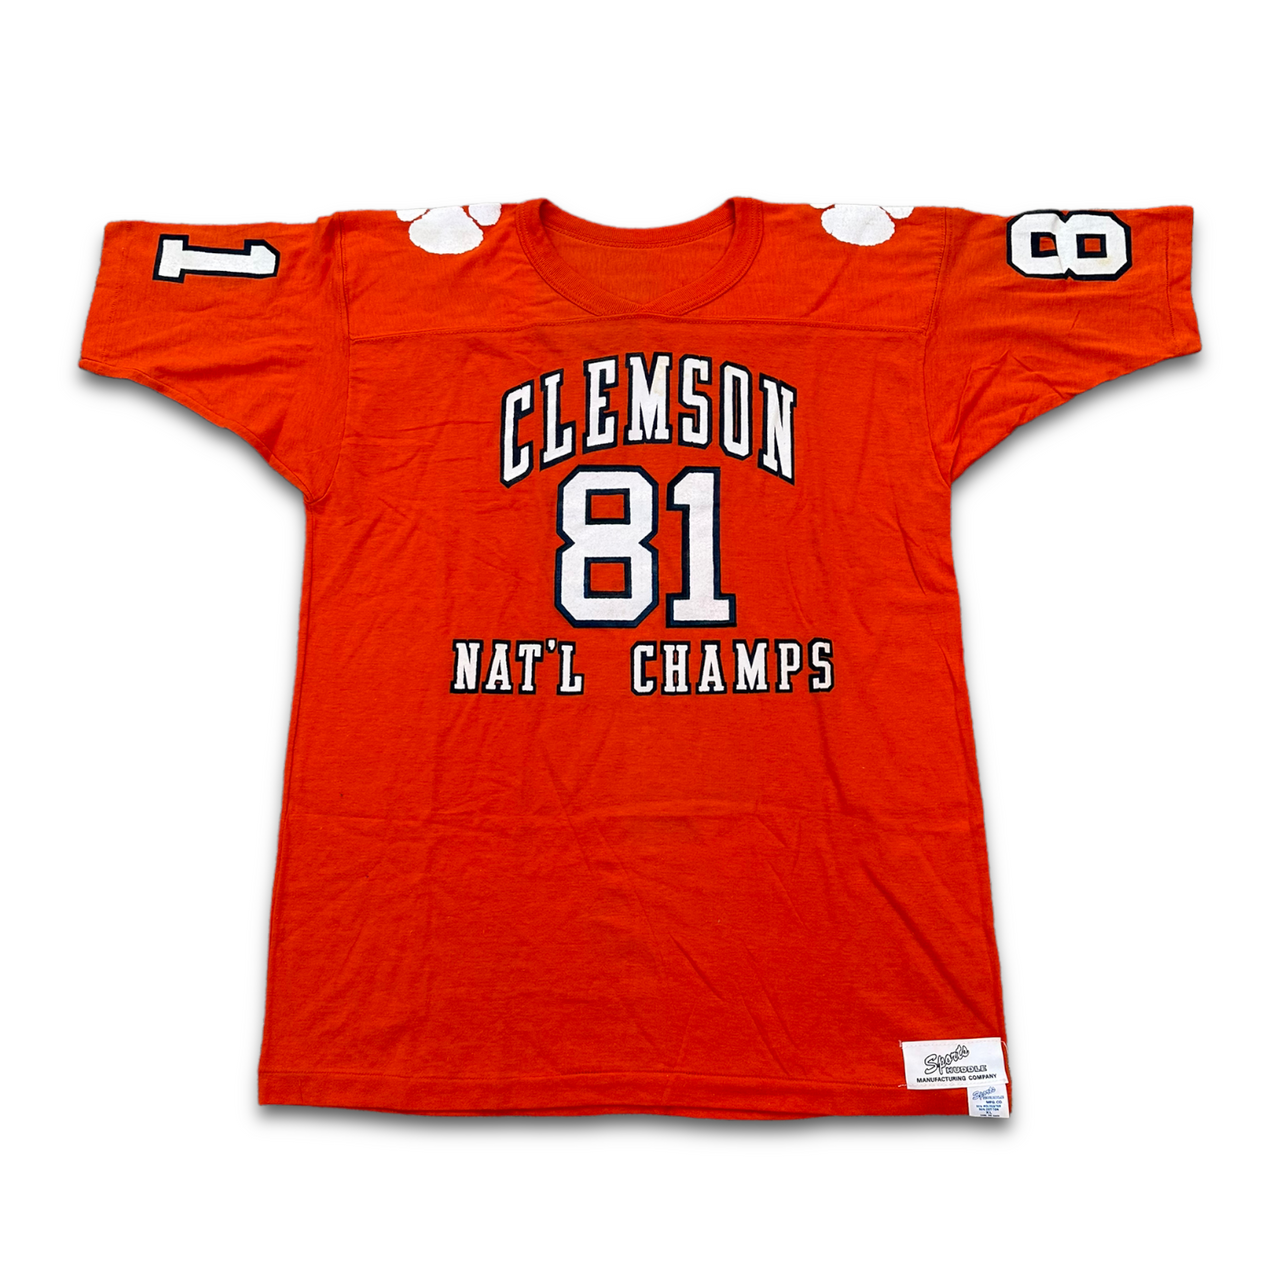 Clemson Tigers Vintage 1981 National Champs Tee XL